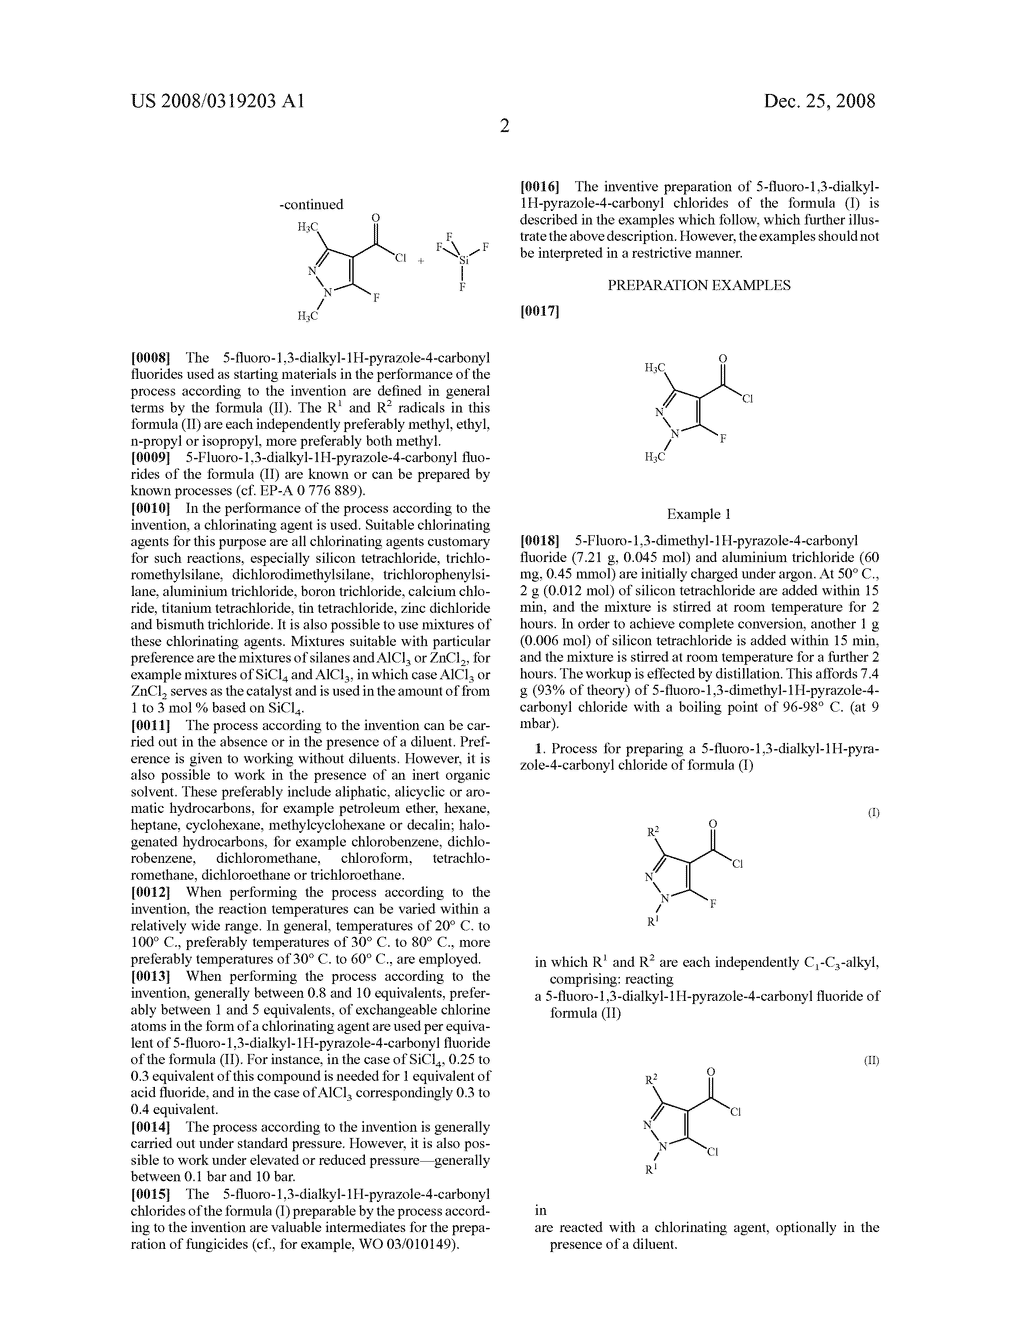 Method for Producing 5-Fluoro-1,3-Dialkyl-1H-Pyrazol-4-Carboxylic Acid Chlorides - diagram, schematic, and image 03